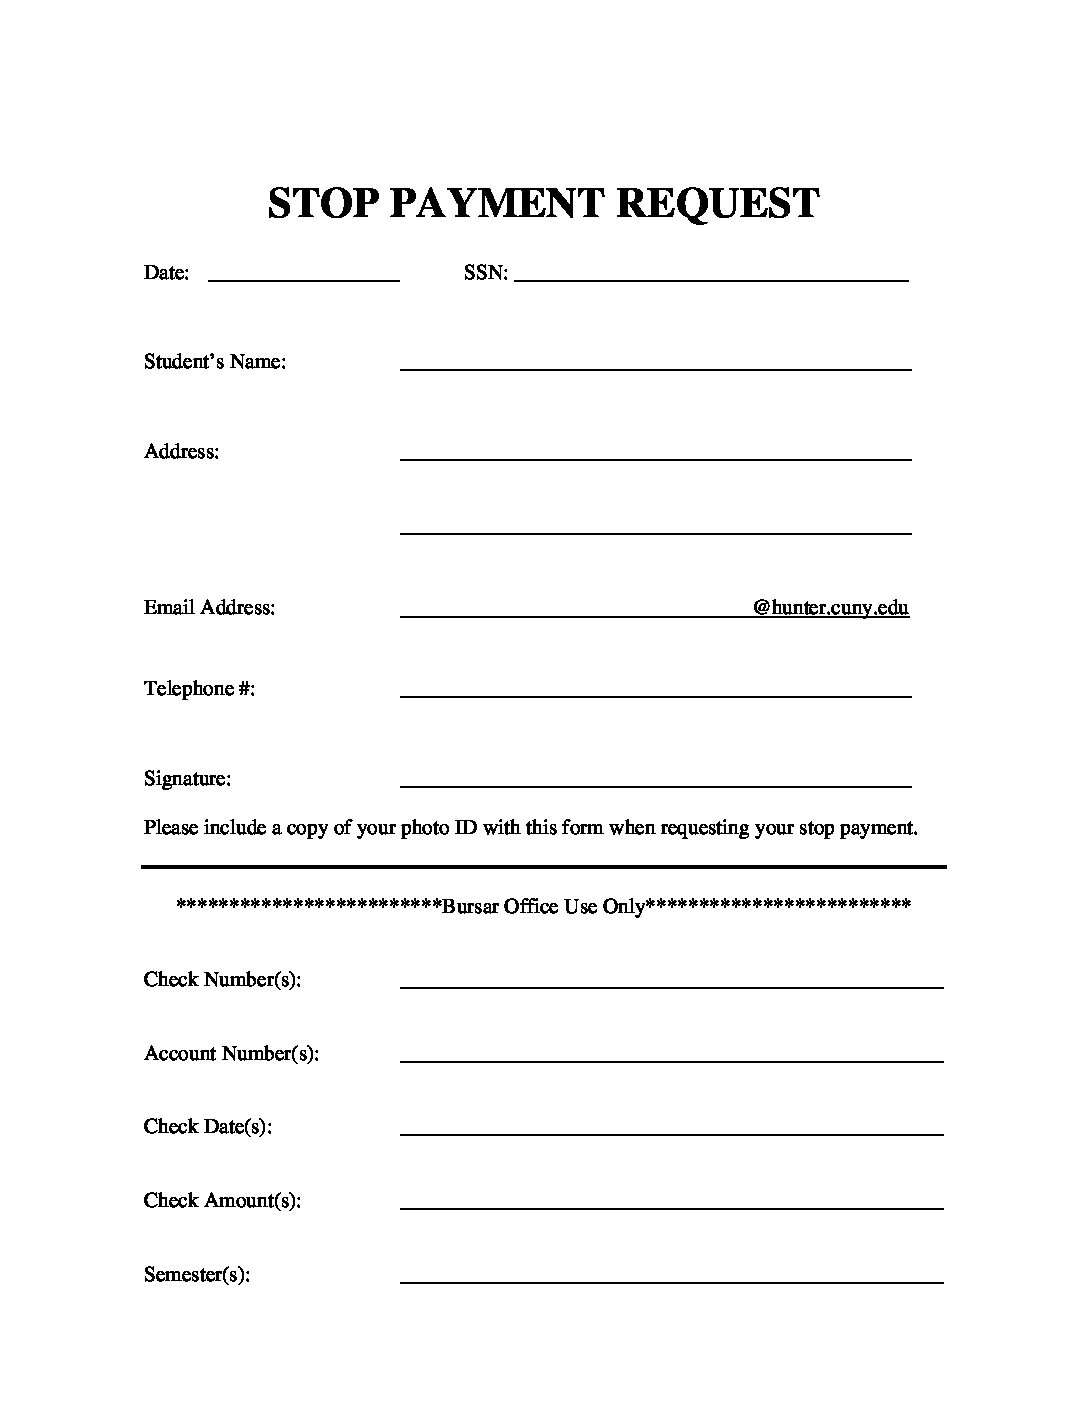 stop-payment-request-form-hunter-college